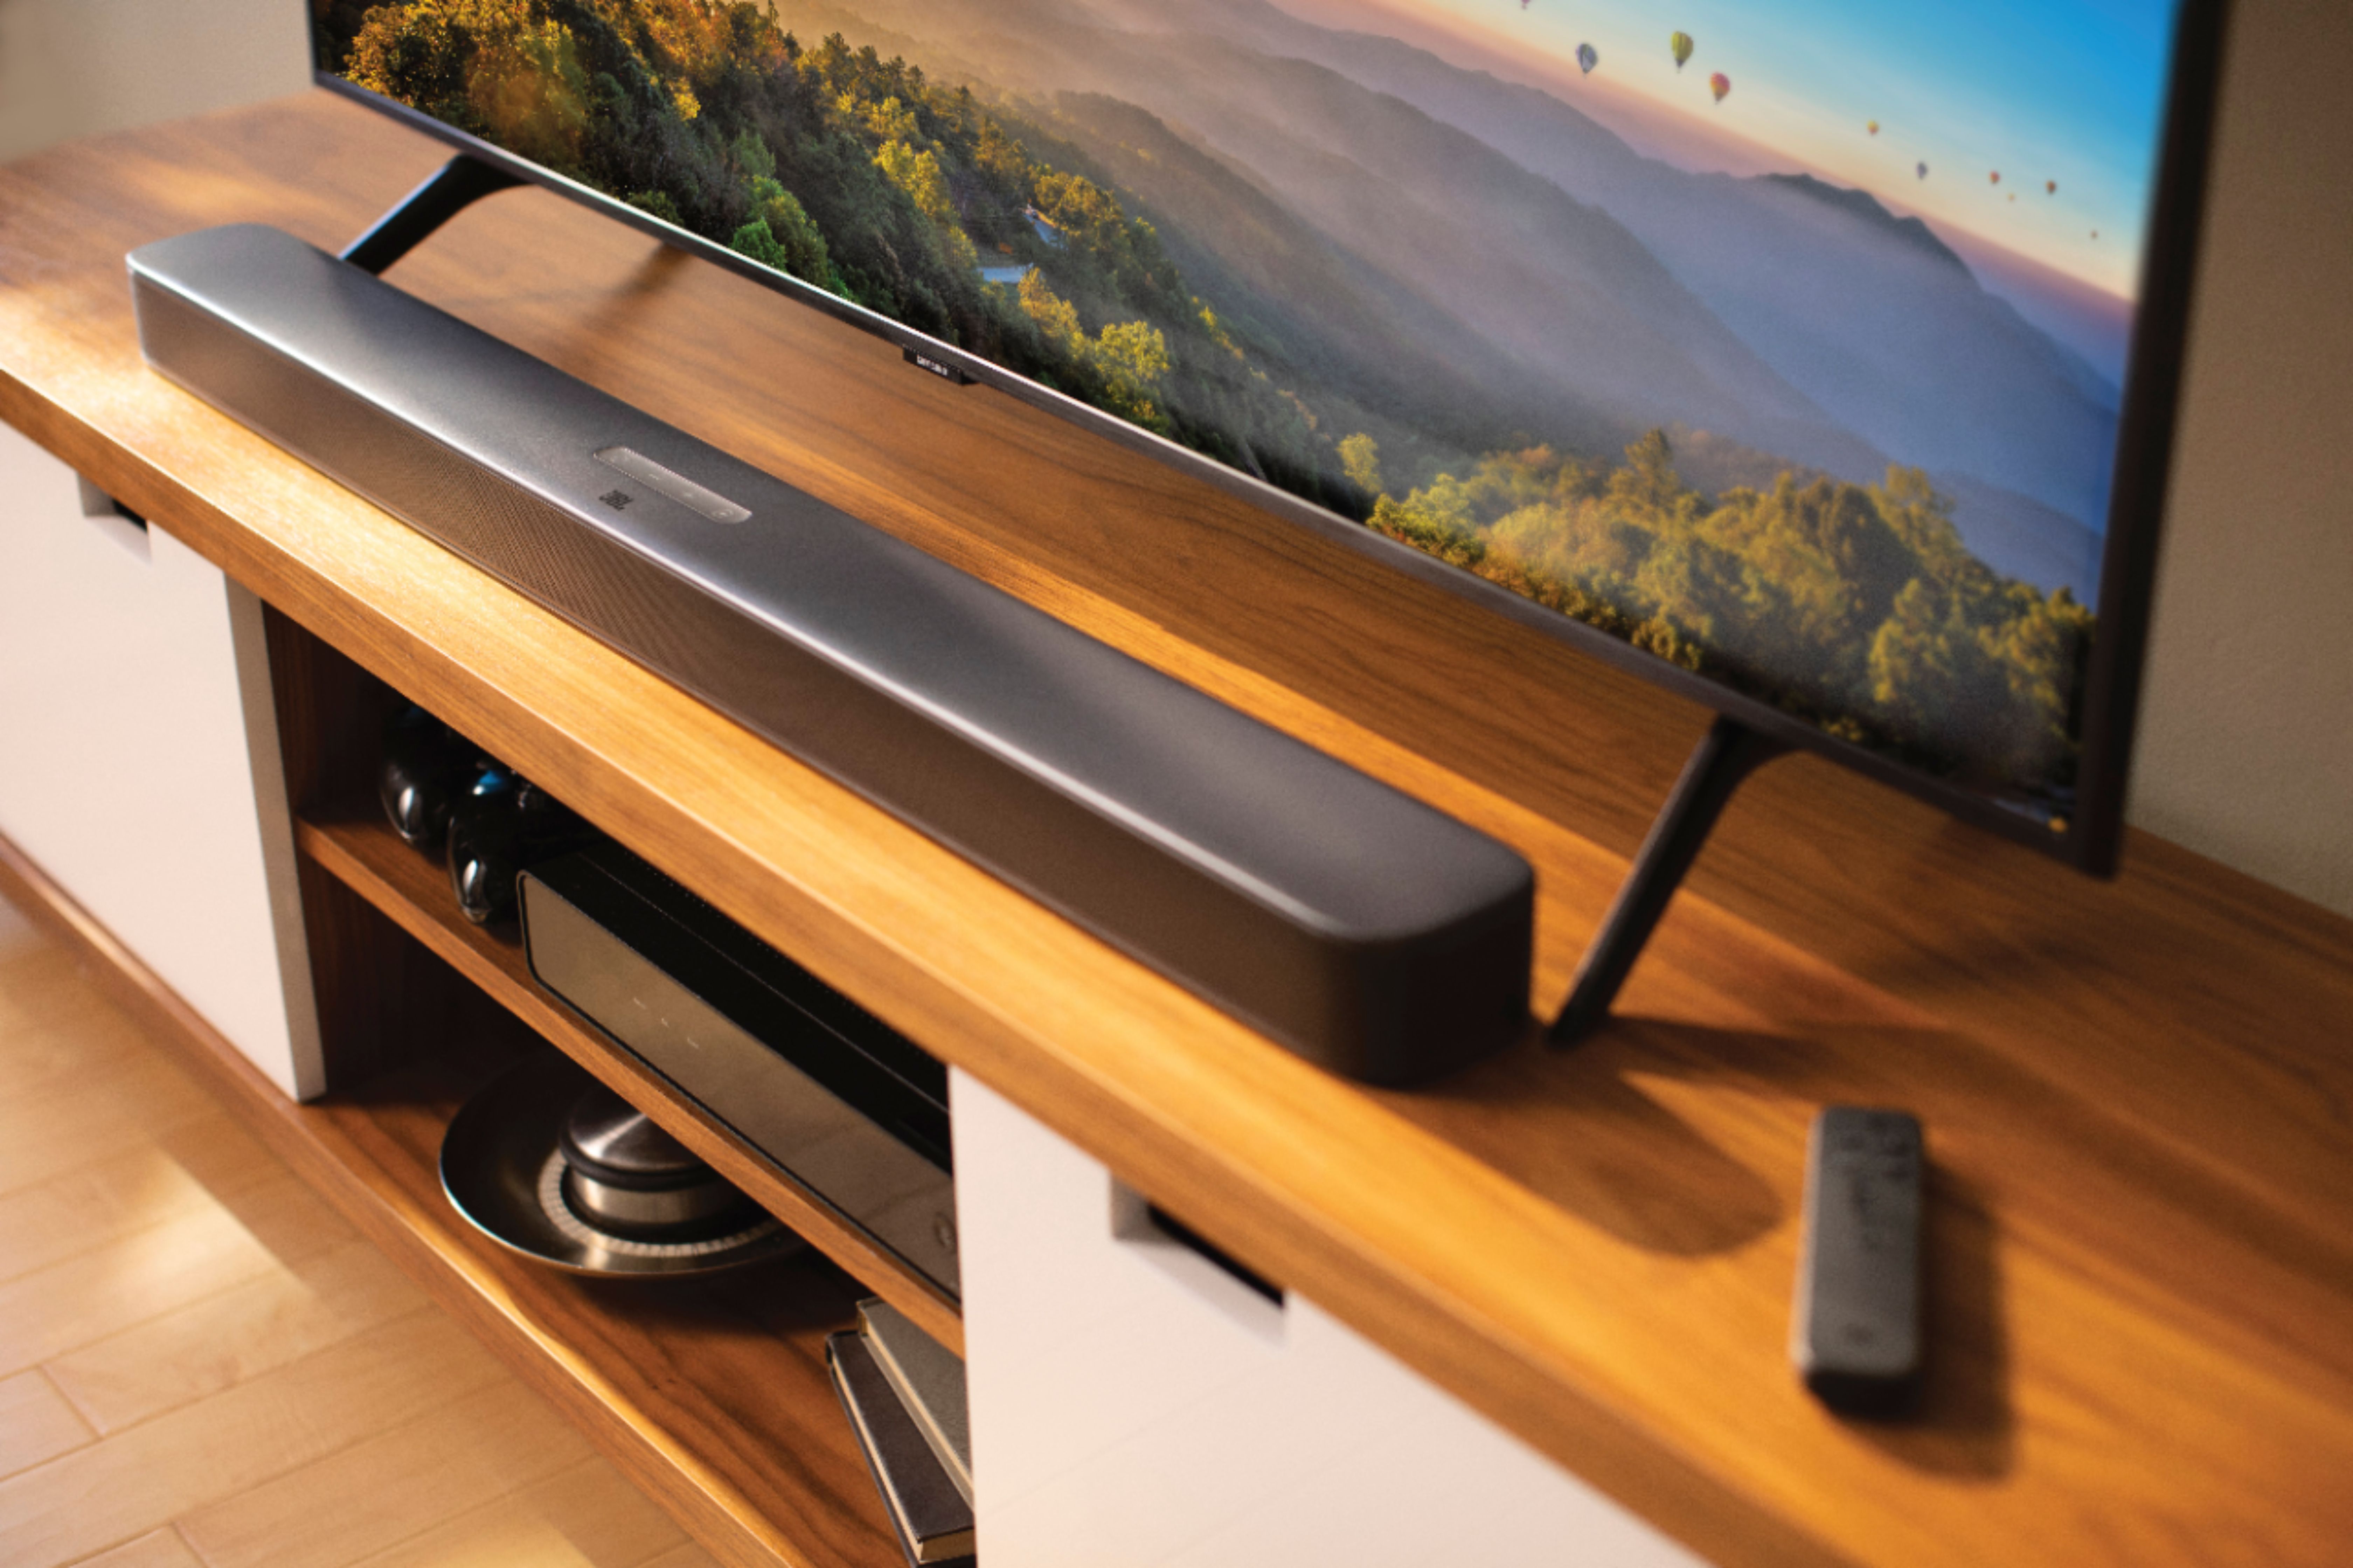 JBL - 2.1-Channel Soundbar with Wireless Subwoofer and Dolby Digital